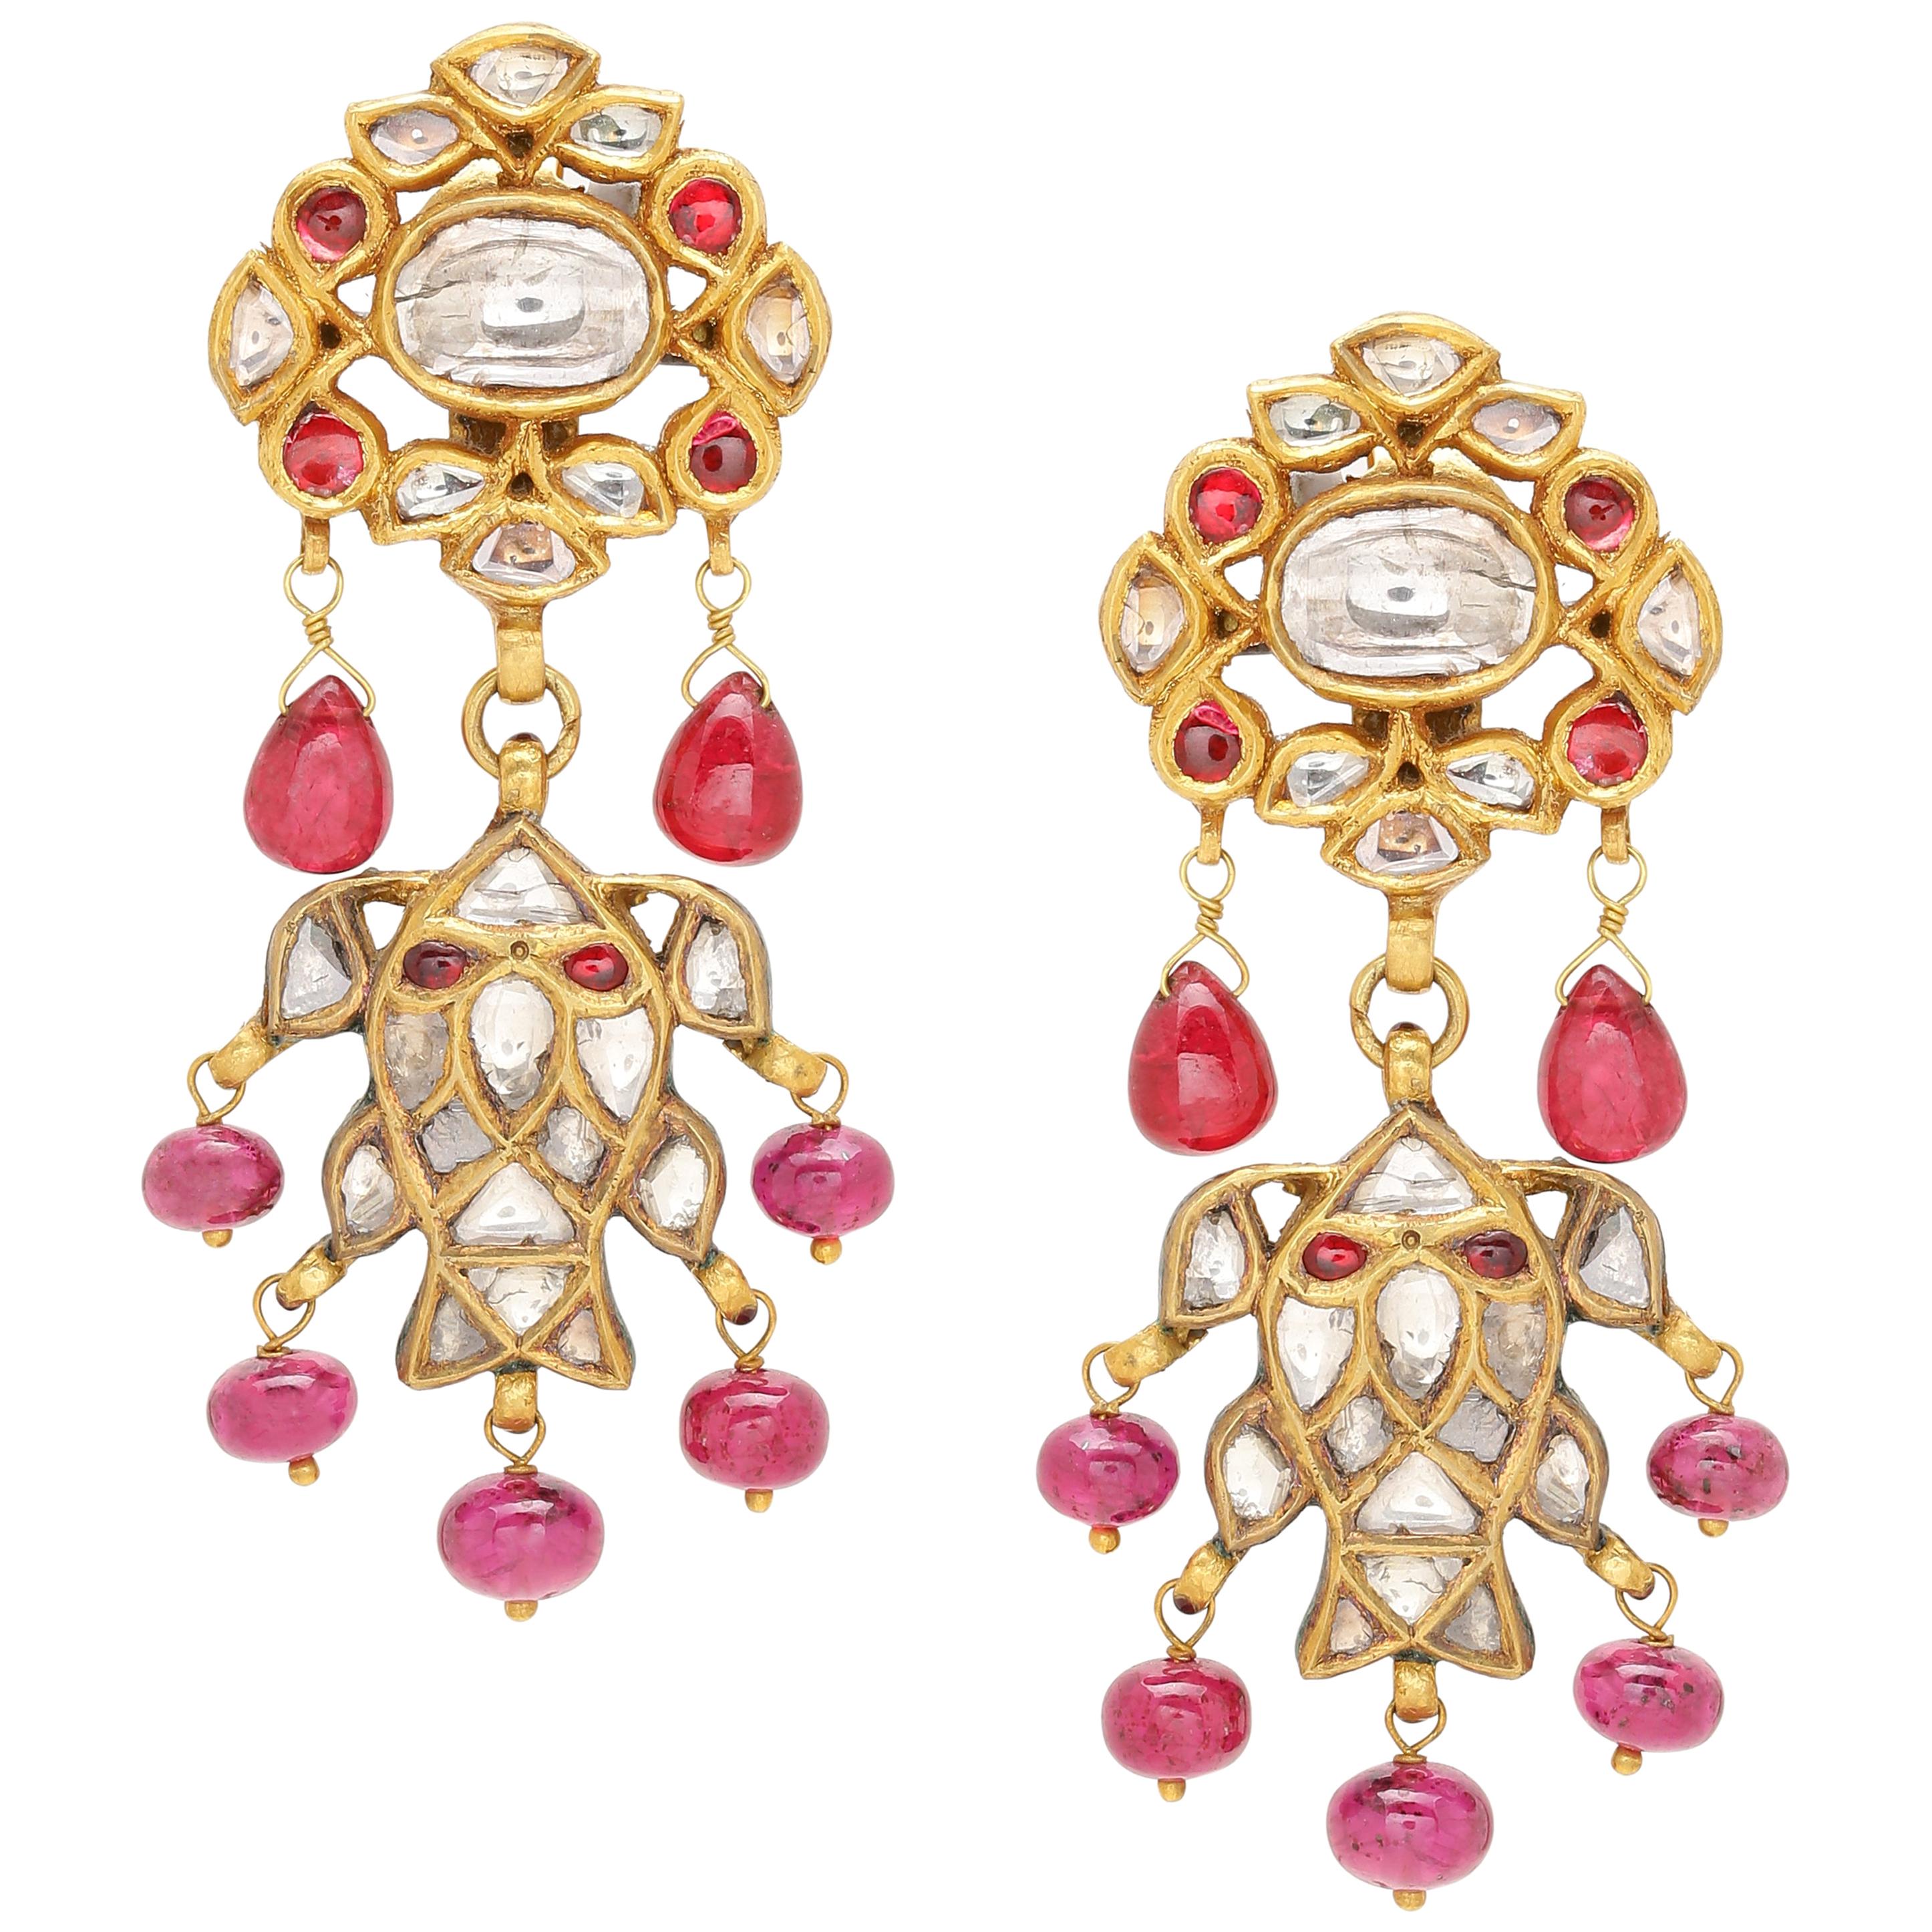 Earrings with Diamonds Rubies and Spinels Handcrafted in 18K Gold with Enamel